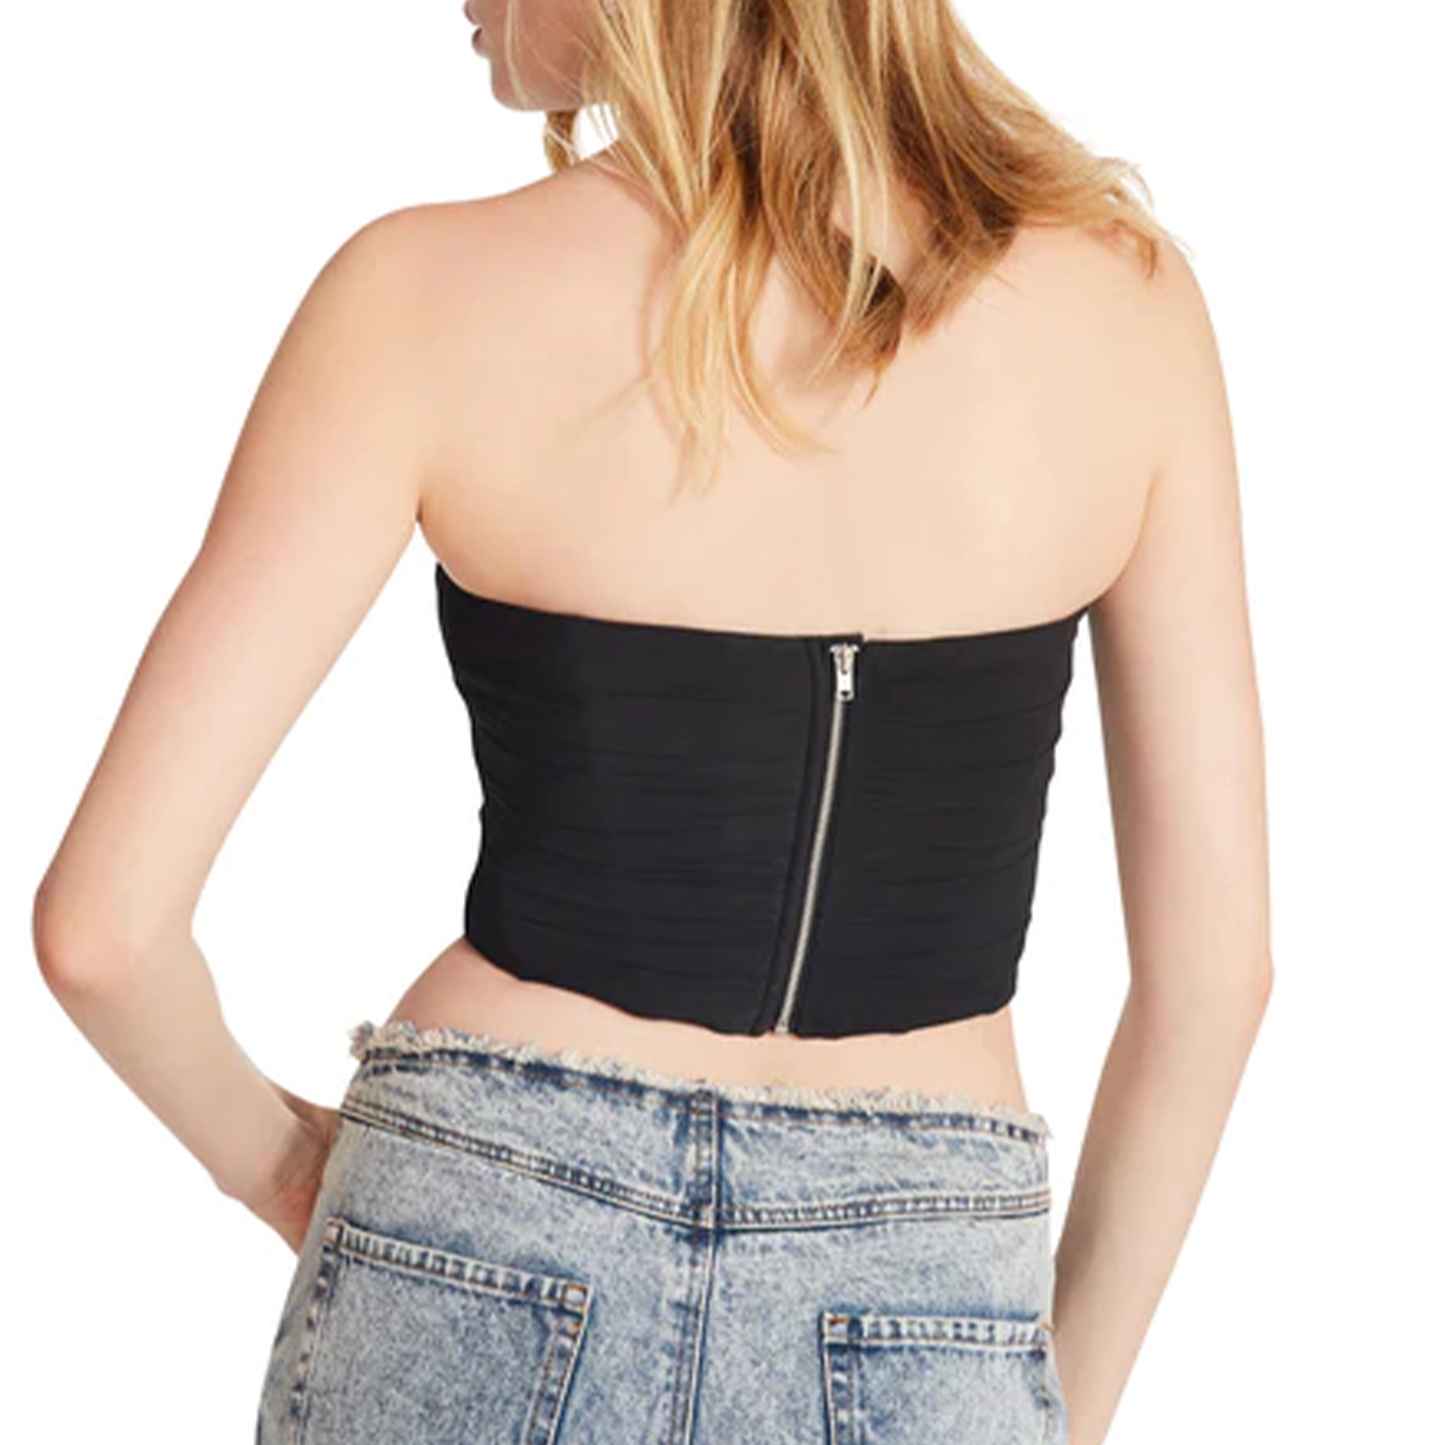 Steve Madden Dahlia Top. Head out for a night of fun in this bustier crop top! Strips of supportive boning create a bustier effect across the cropped bodice. The mesh overlay over a boned bodice will pair perfectly with your oversized blazer and favorite denim or mini skirt